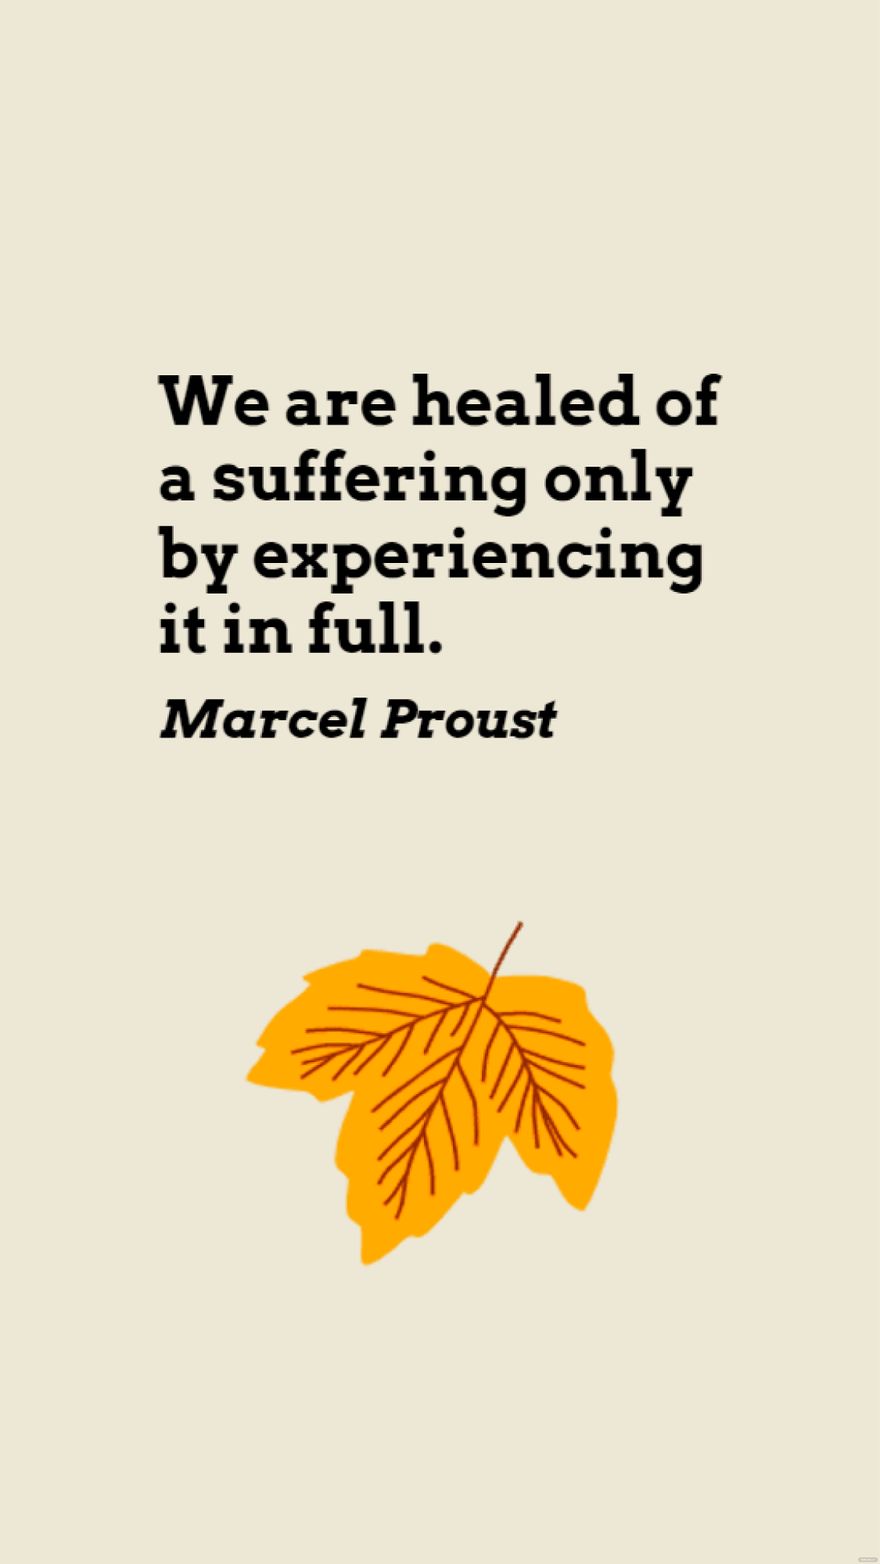 Marcel Proust - We are healed of a suffering only by experiencing it in full. in JPG